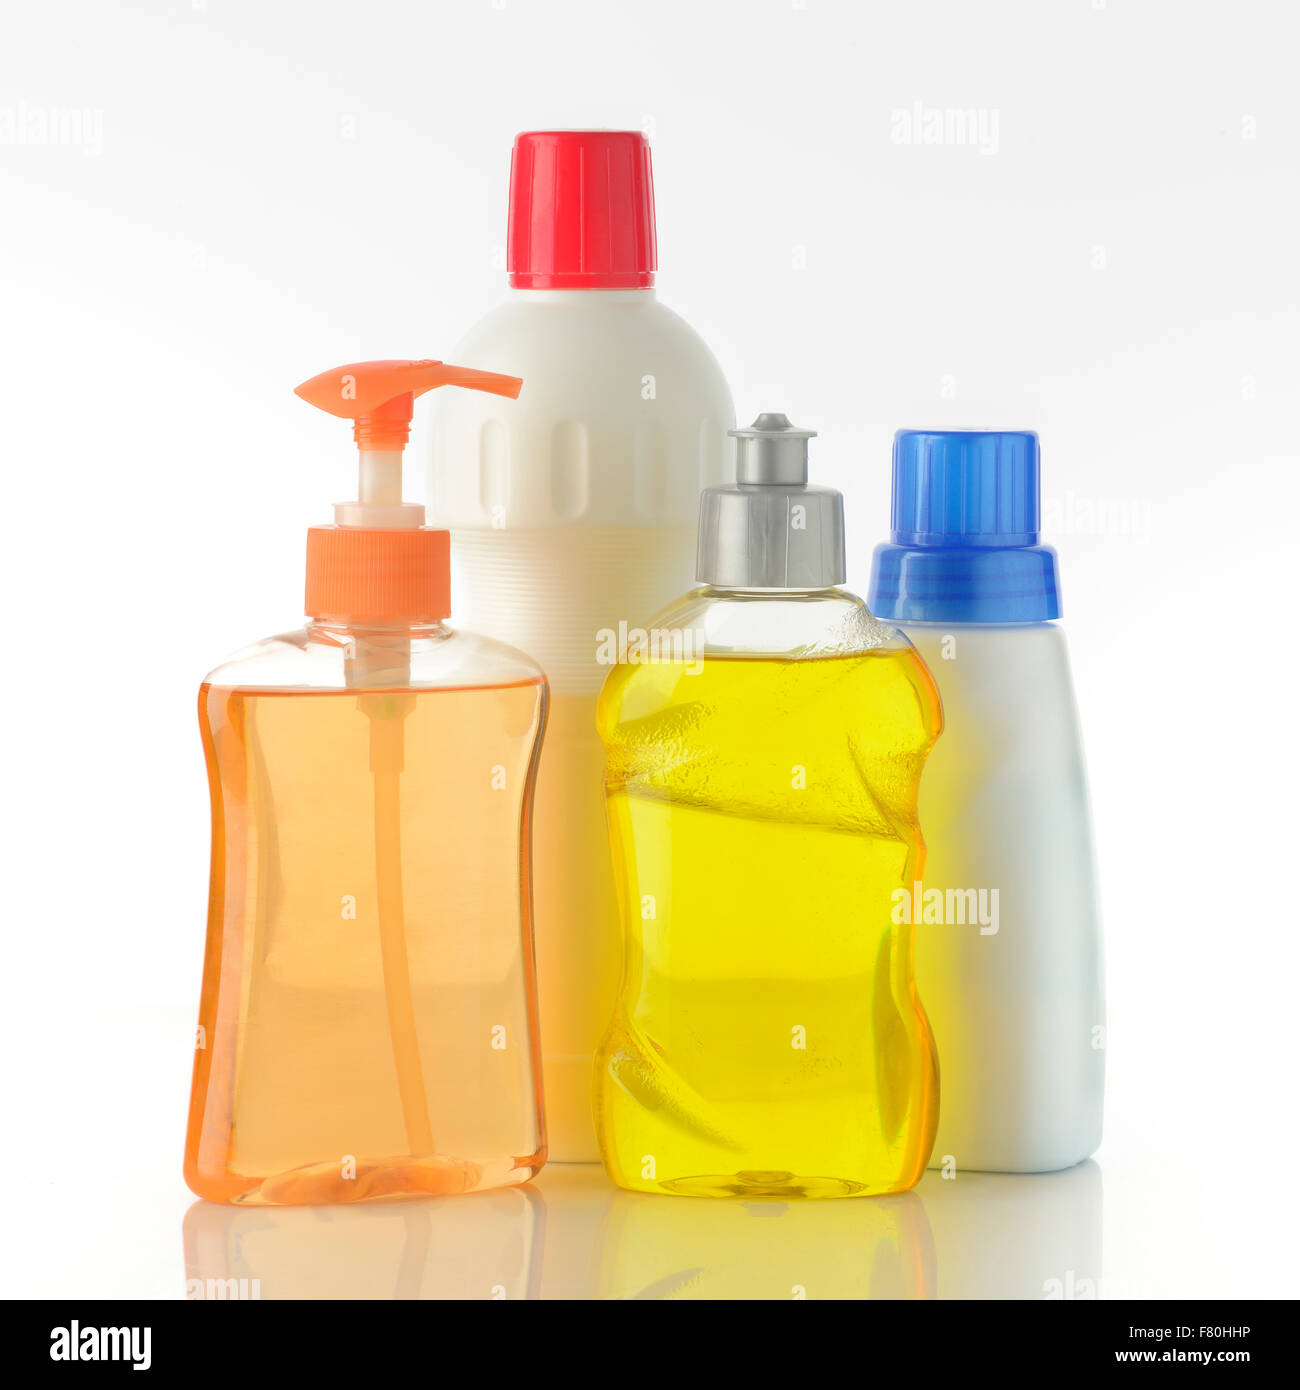 Cleaning Bottles Stock Photo